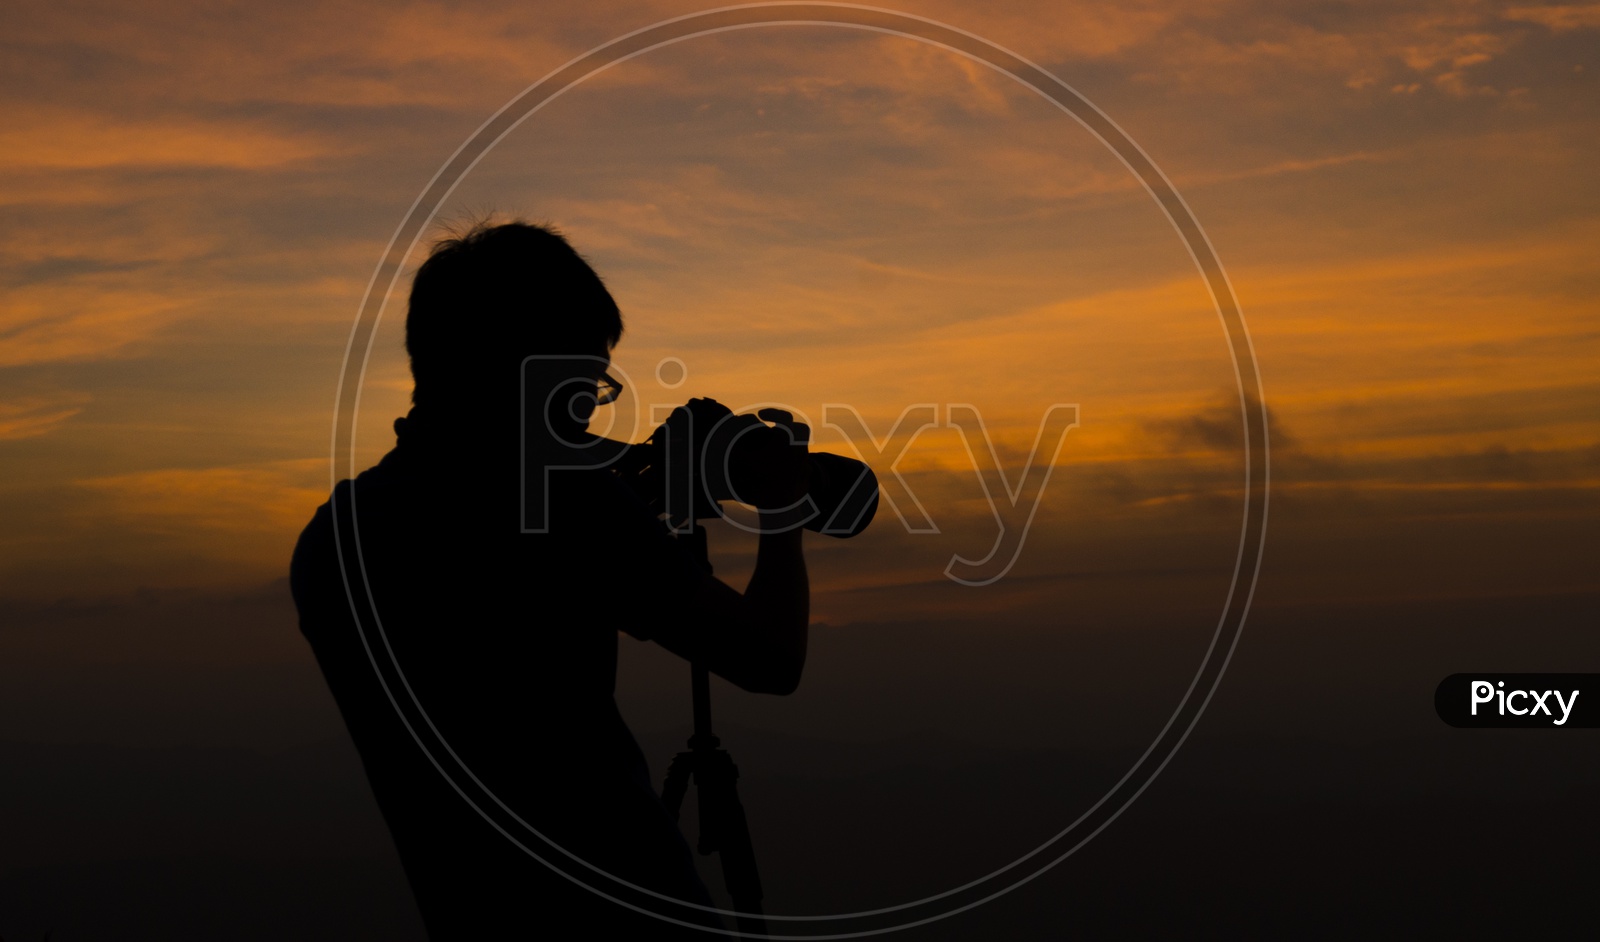 Silhouette of a Photographer Over Sunset Sky